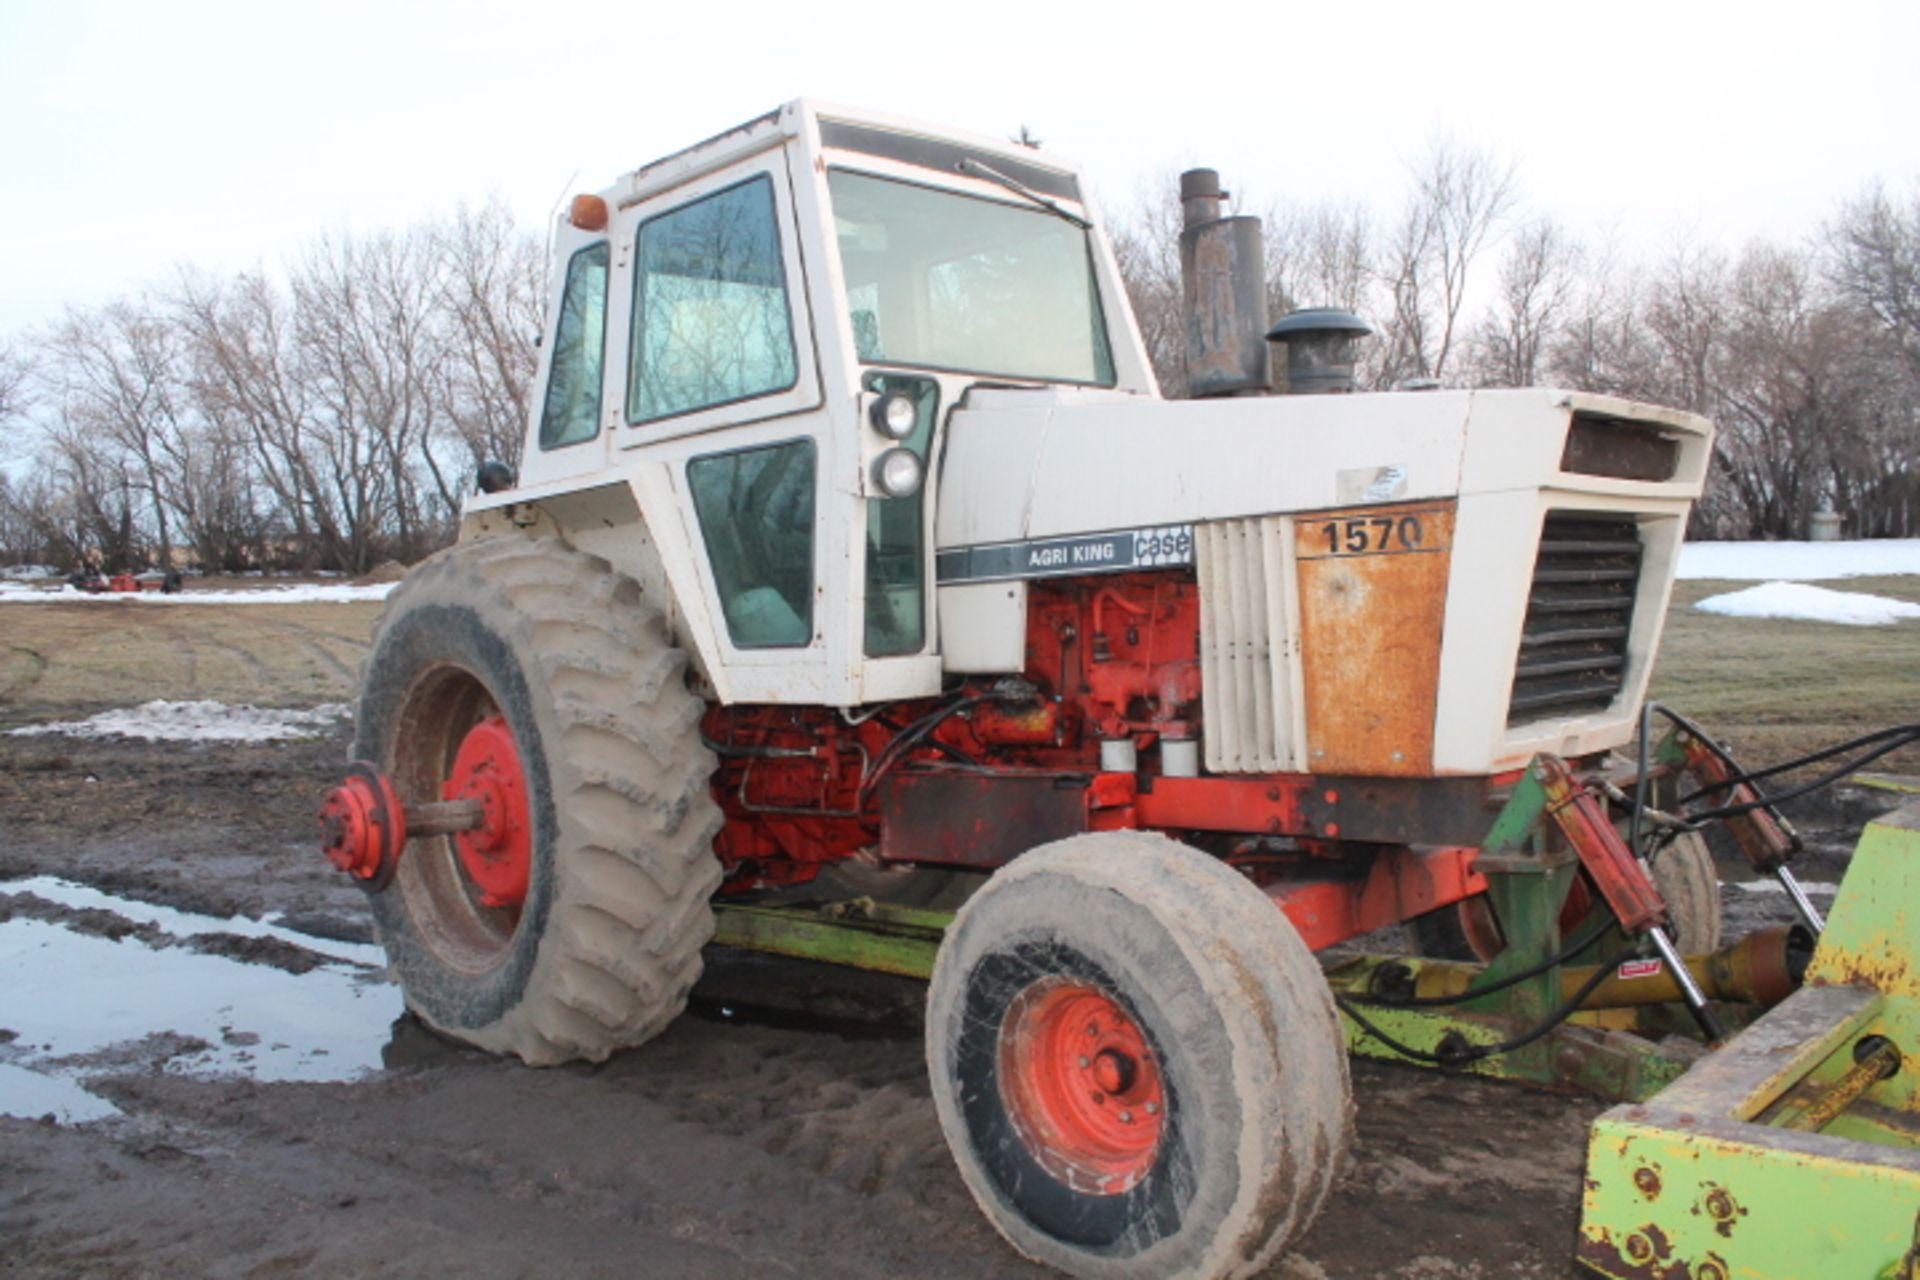 1978 Case 1570, 2 hyds, PTO, 20.8x38 good tires, PS trans.,  showing 6569hrs, SN 8819944 NOTE - Image 4 of 10